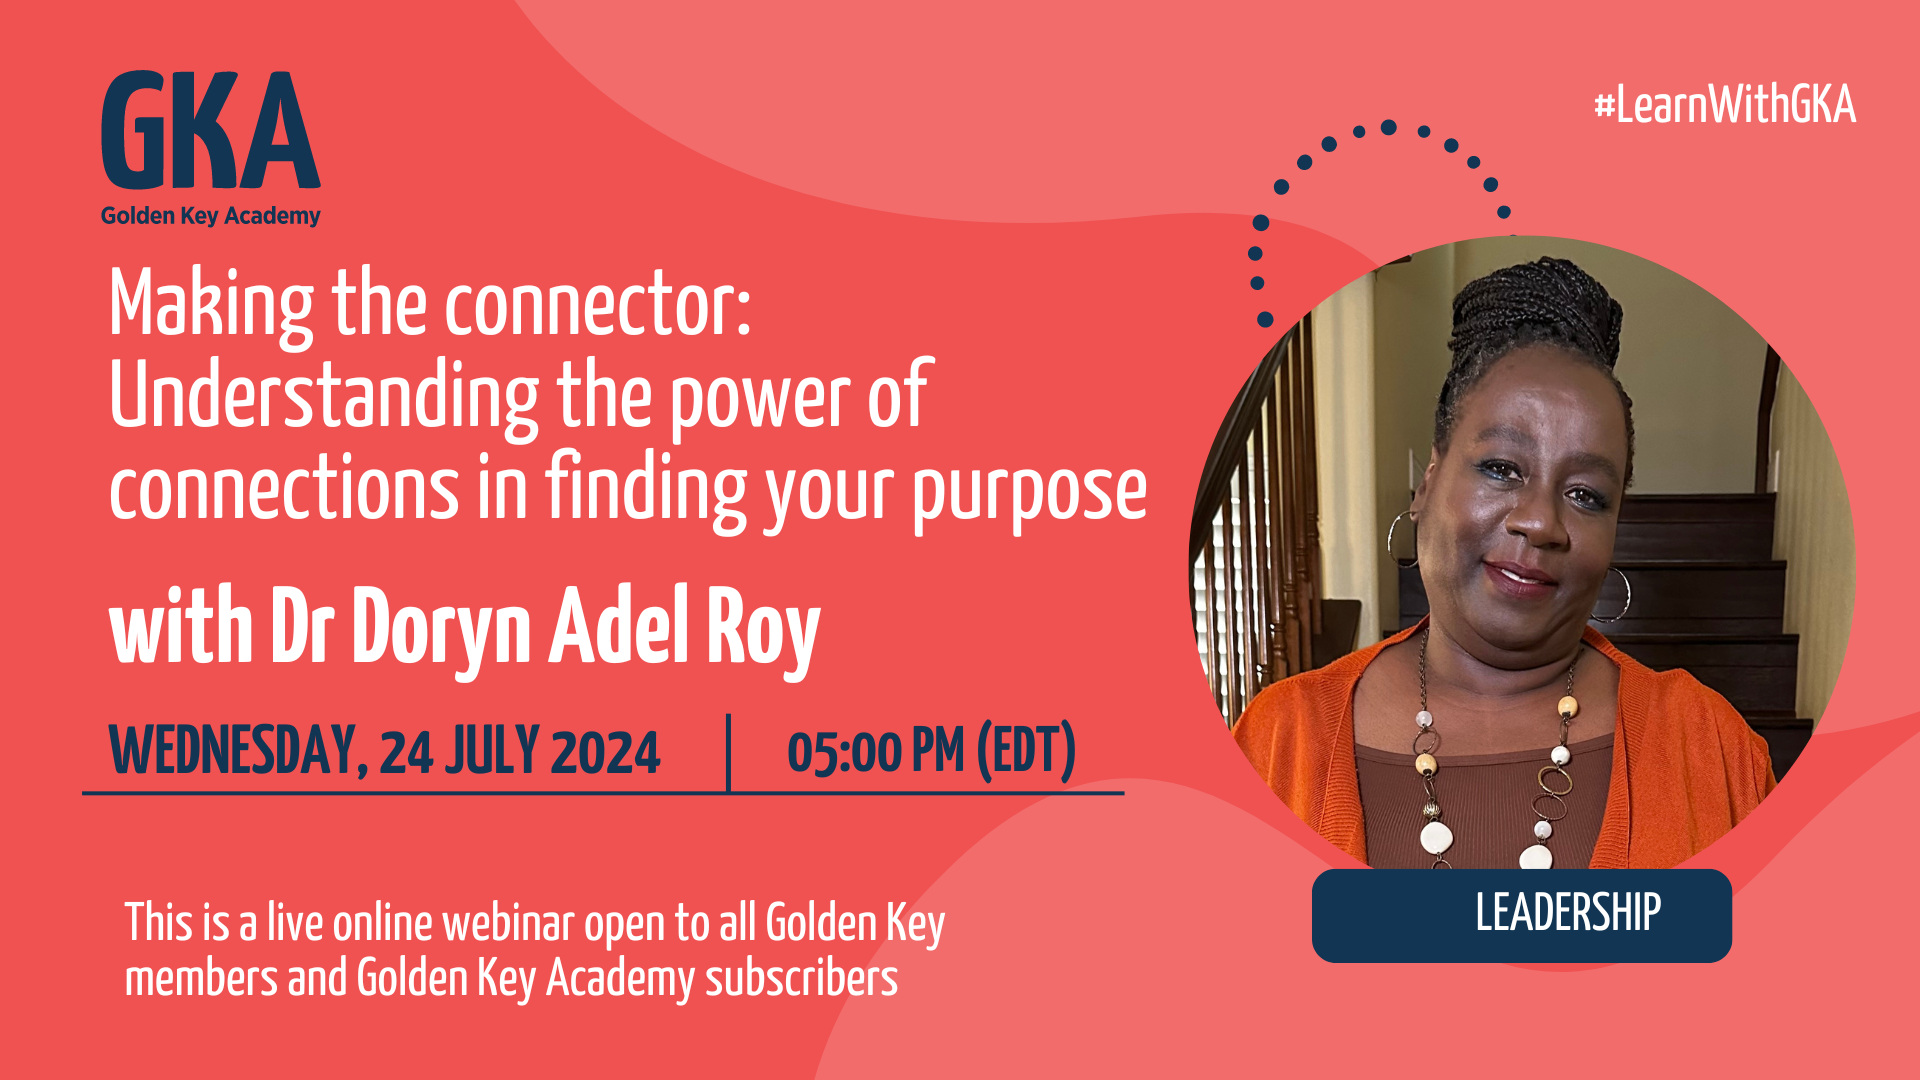 Making the connector - Understanding the power of connections in finding your purpose with Dr. Doryn Adel Roy